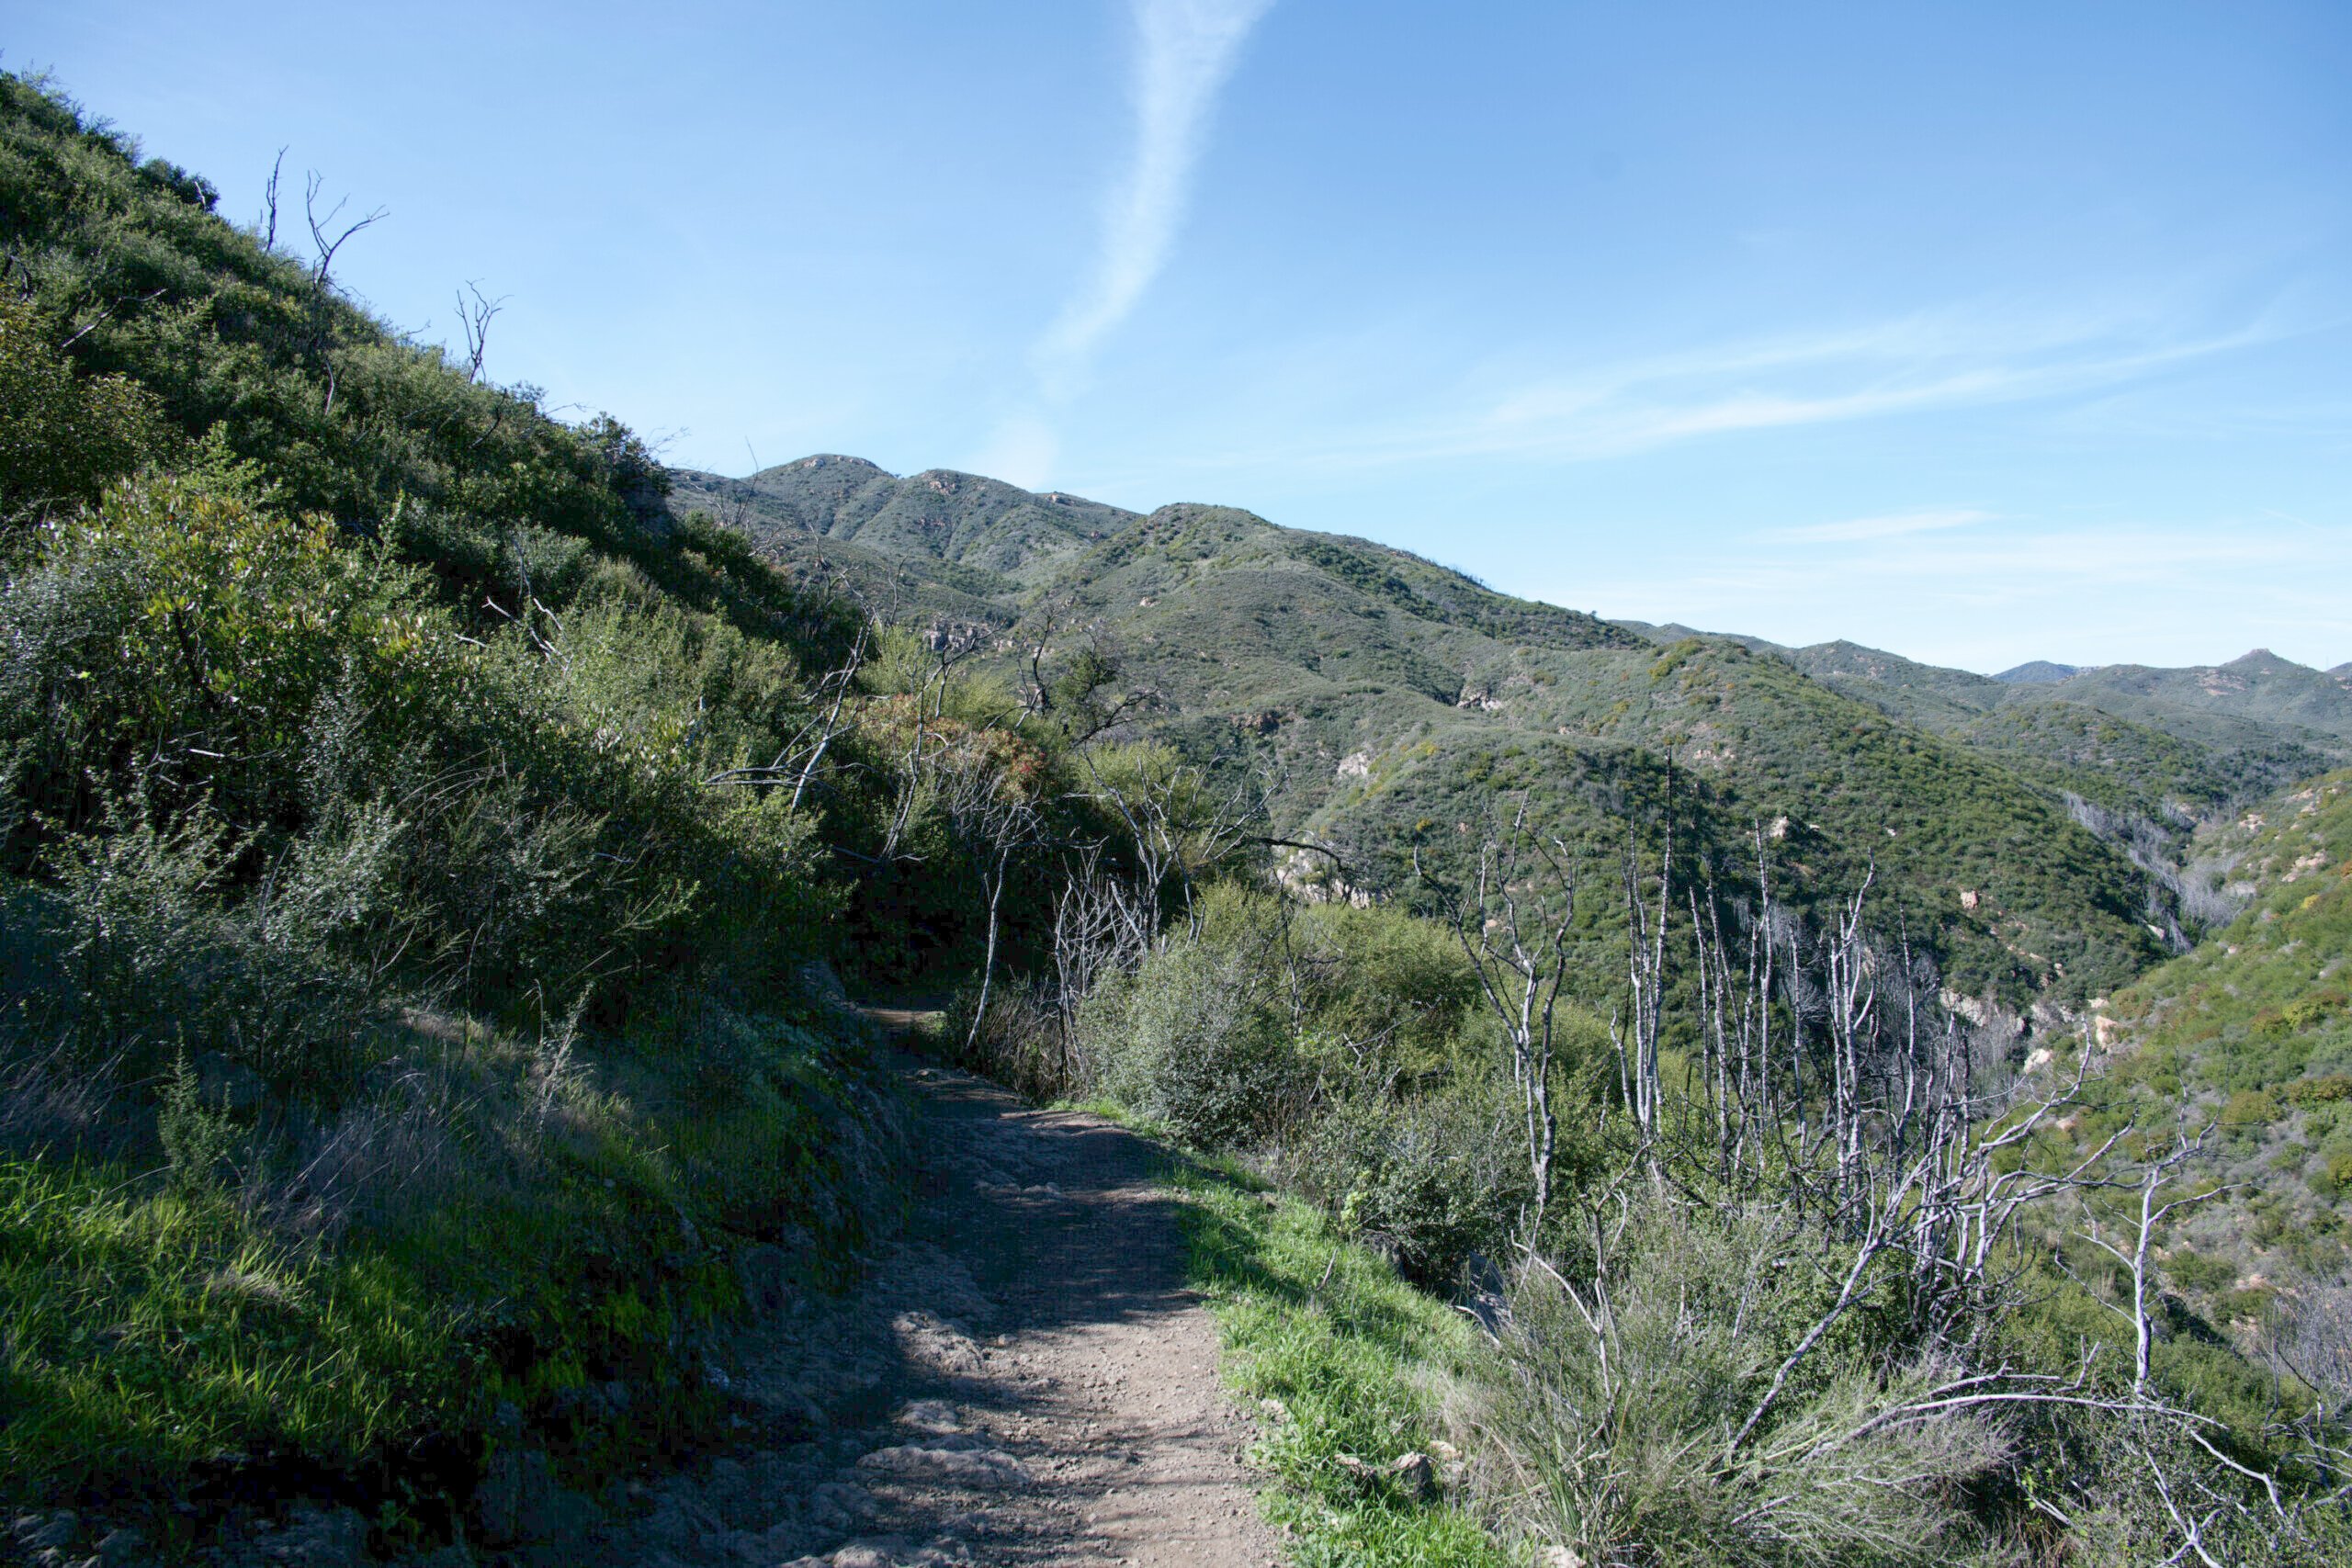 A scenic view of the Backbone Trail in the Santa Monica Mountains, with vibrant greenery and clear blue skies.